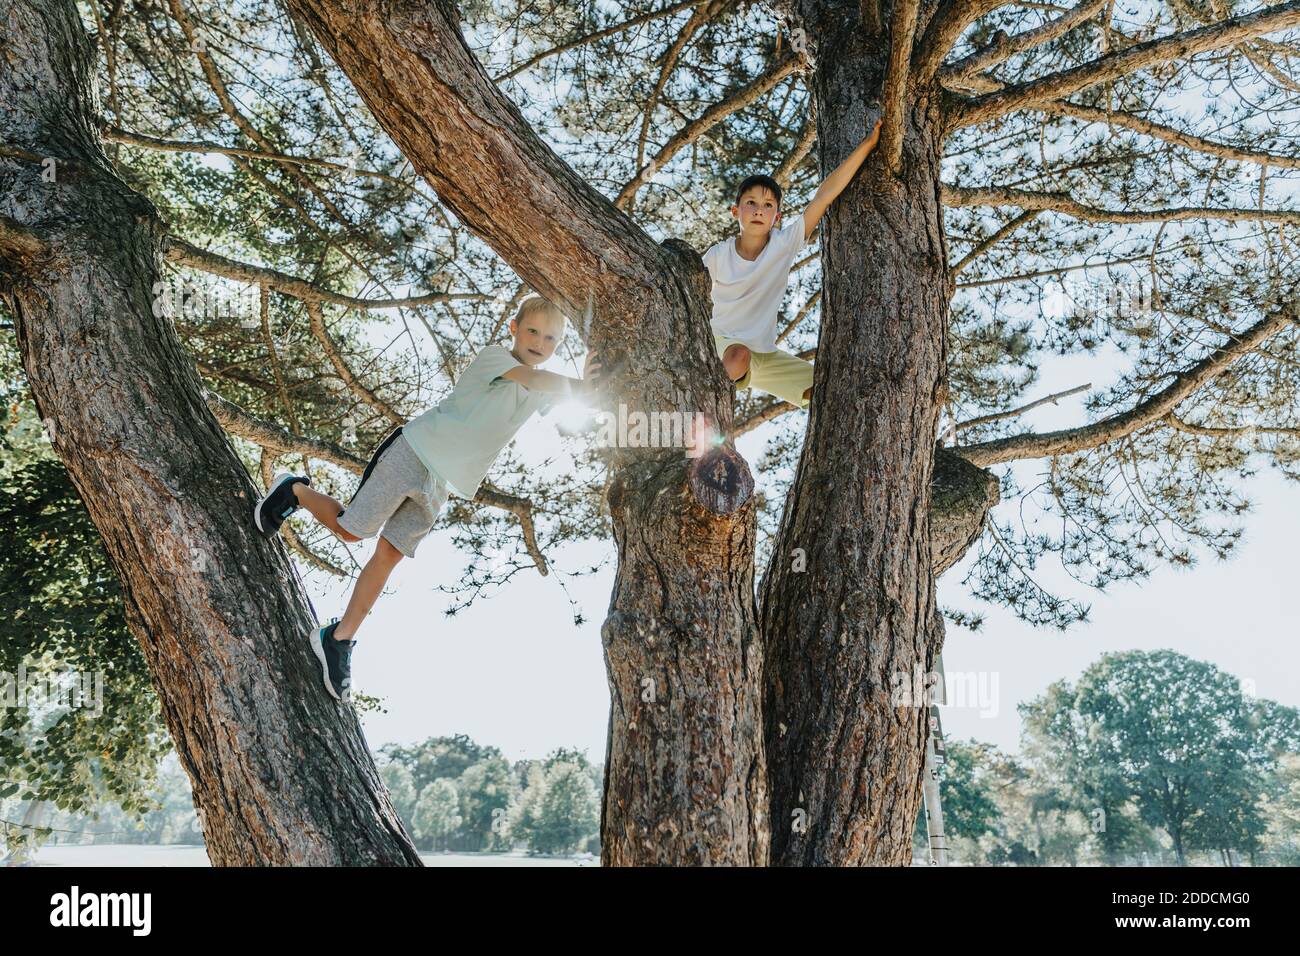 Brothers climbing on pine tree in public park during sunny day Stock Photo